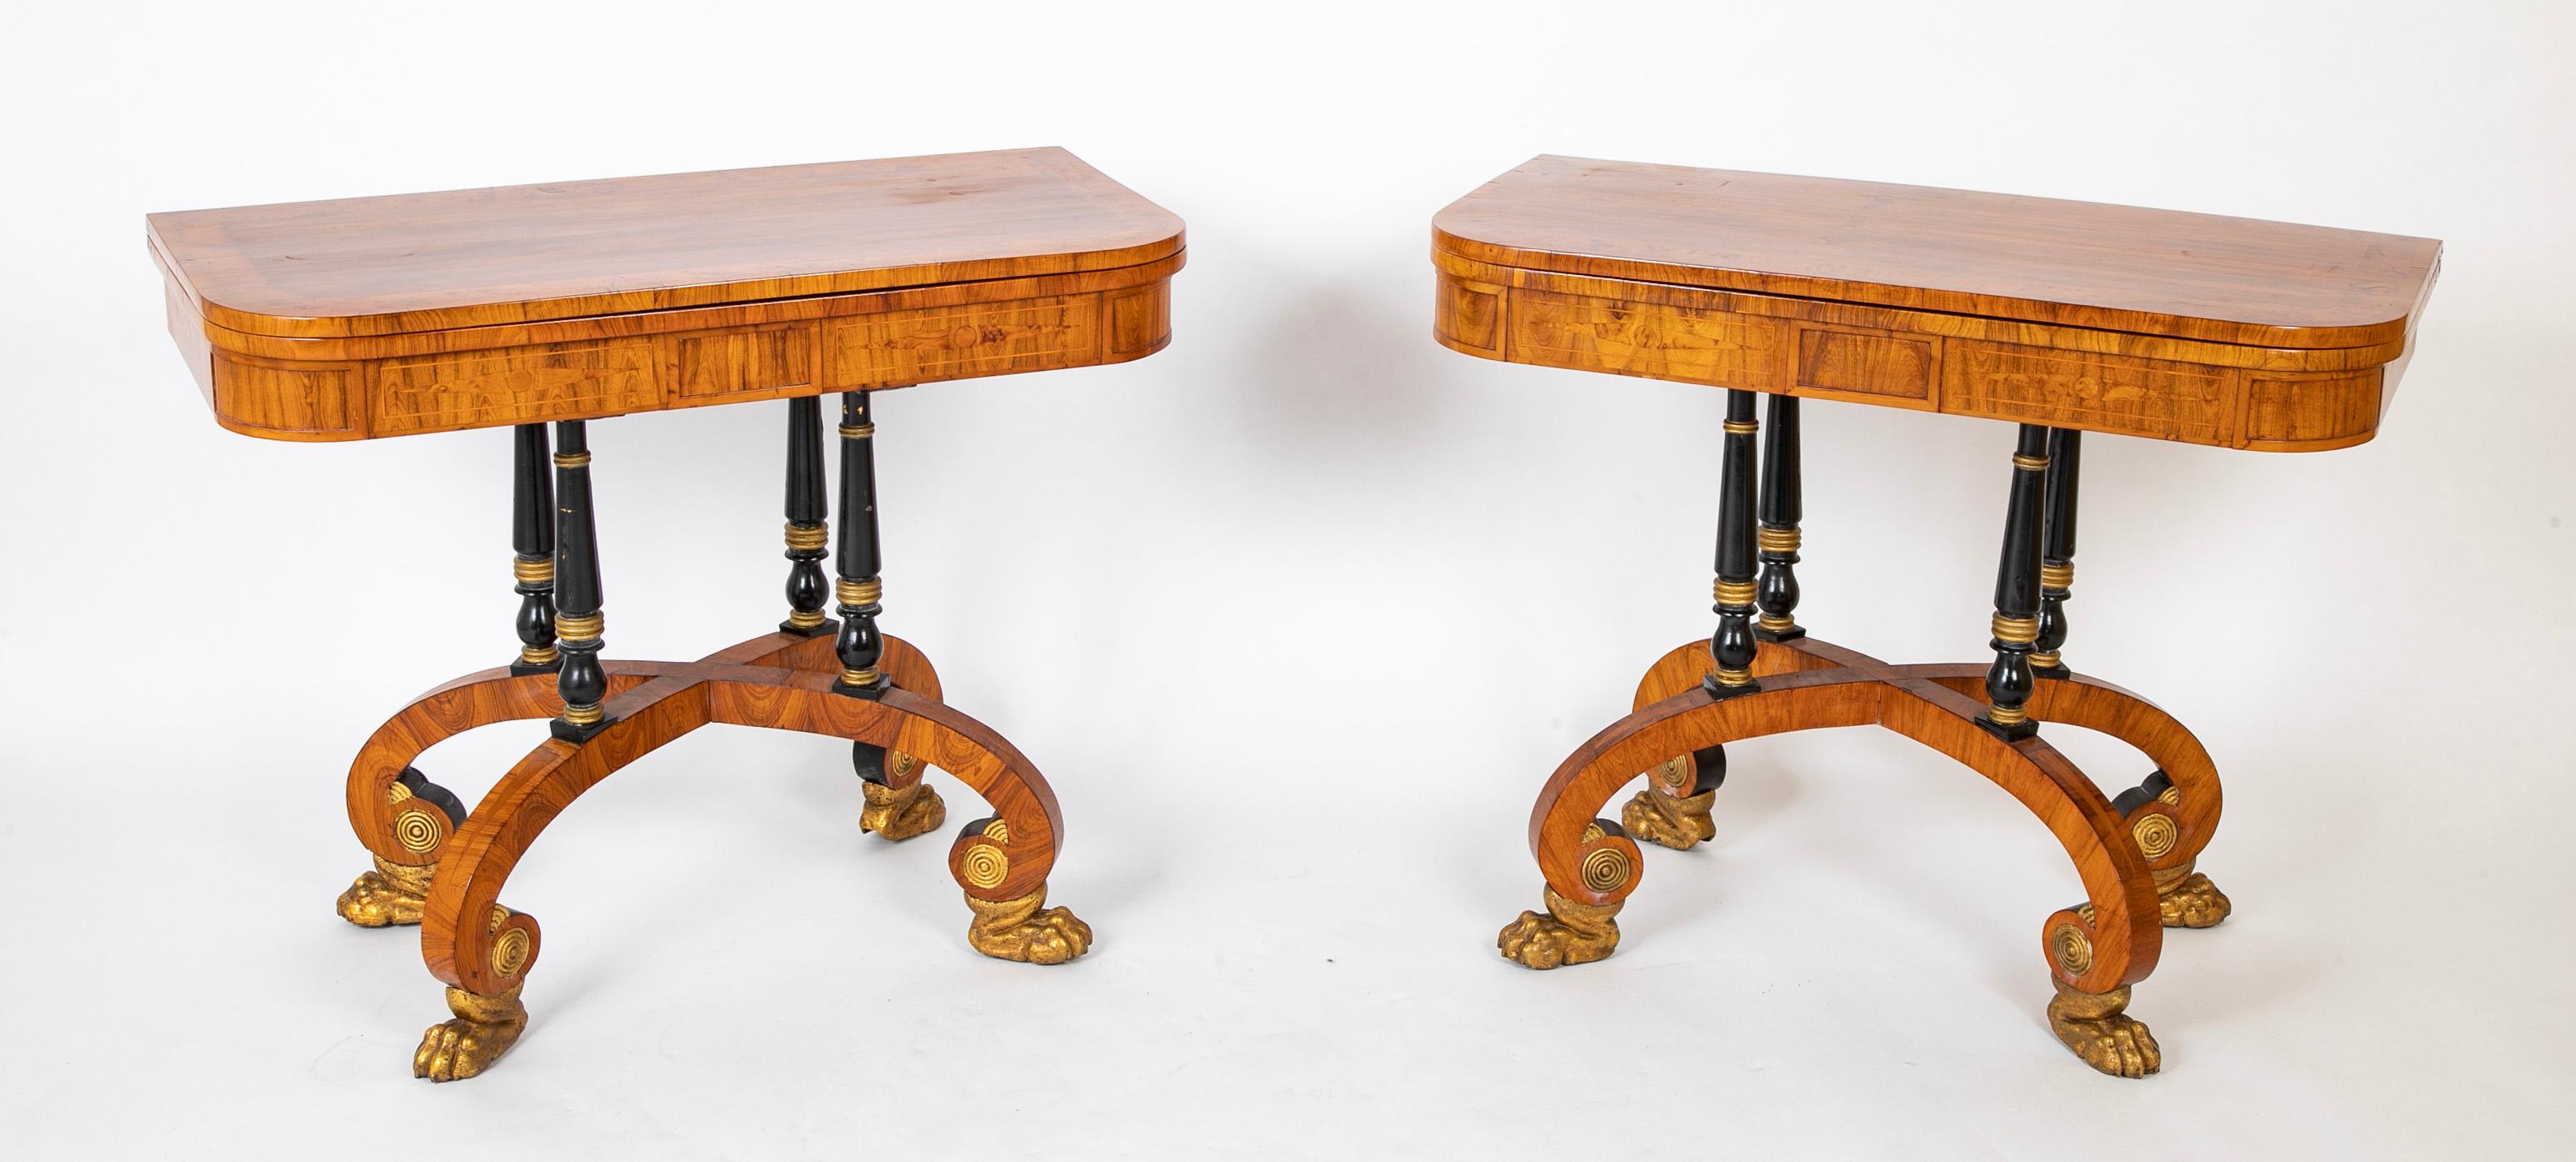 English Rare Regency Pair of Games Tables For Sale